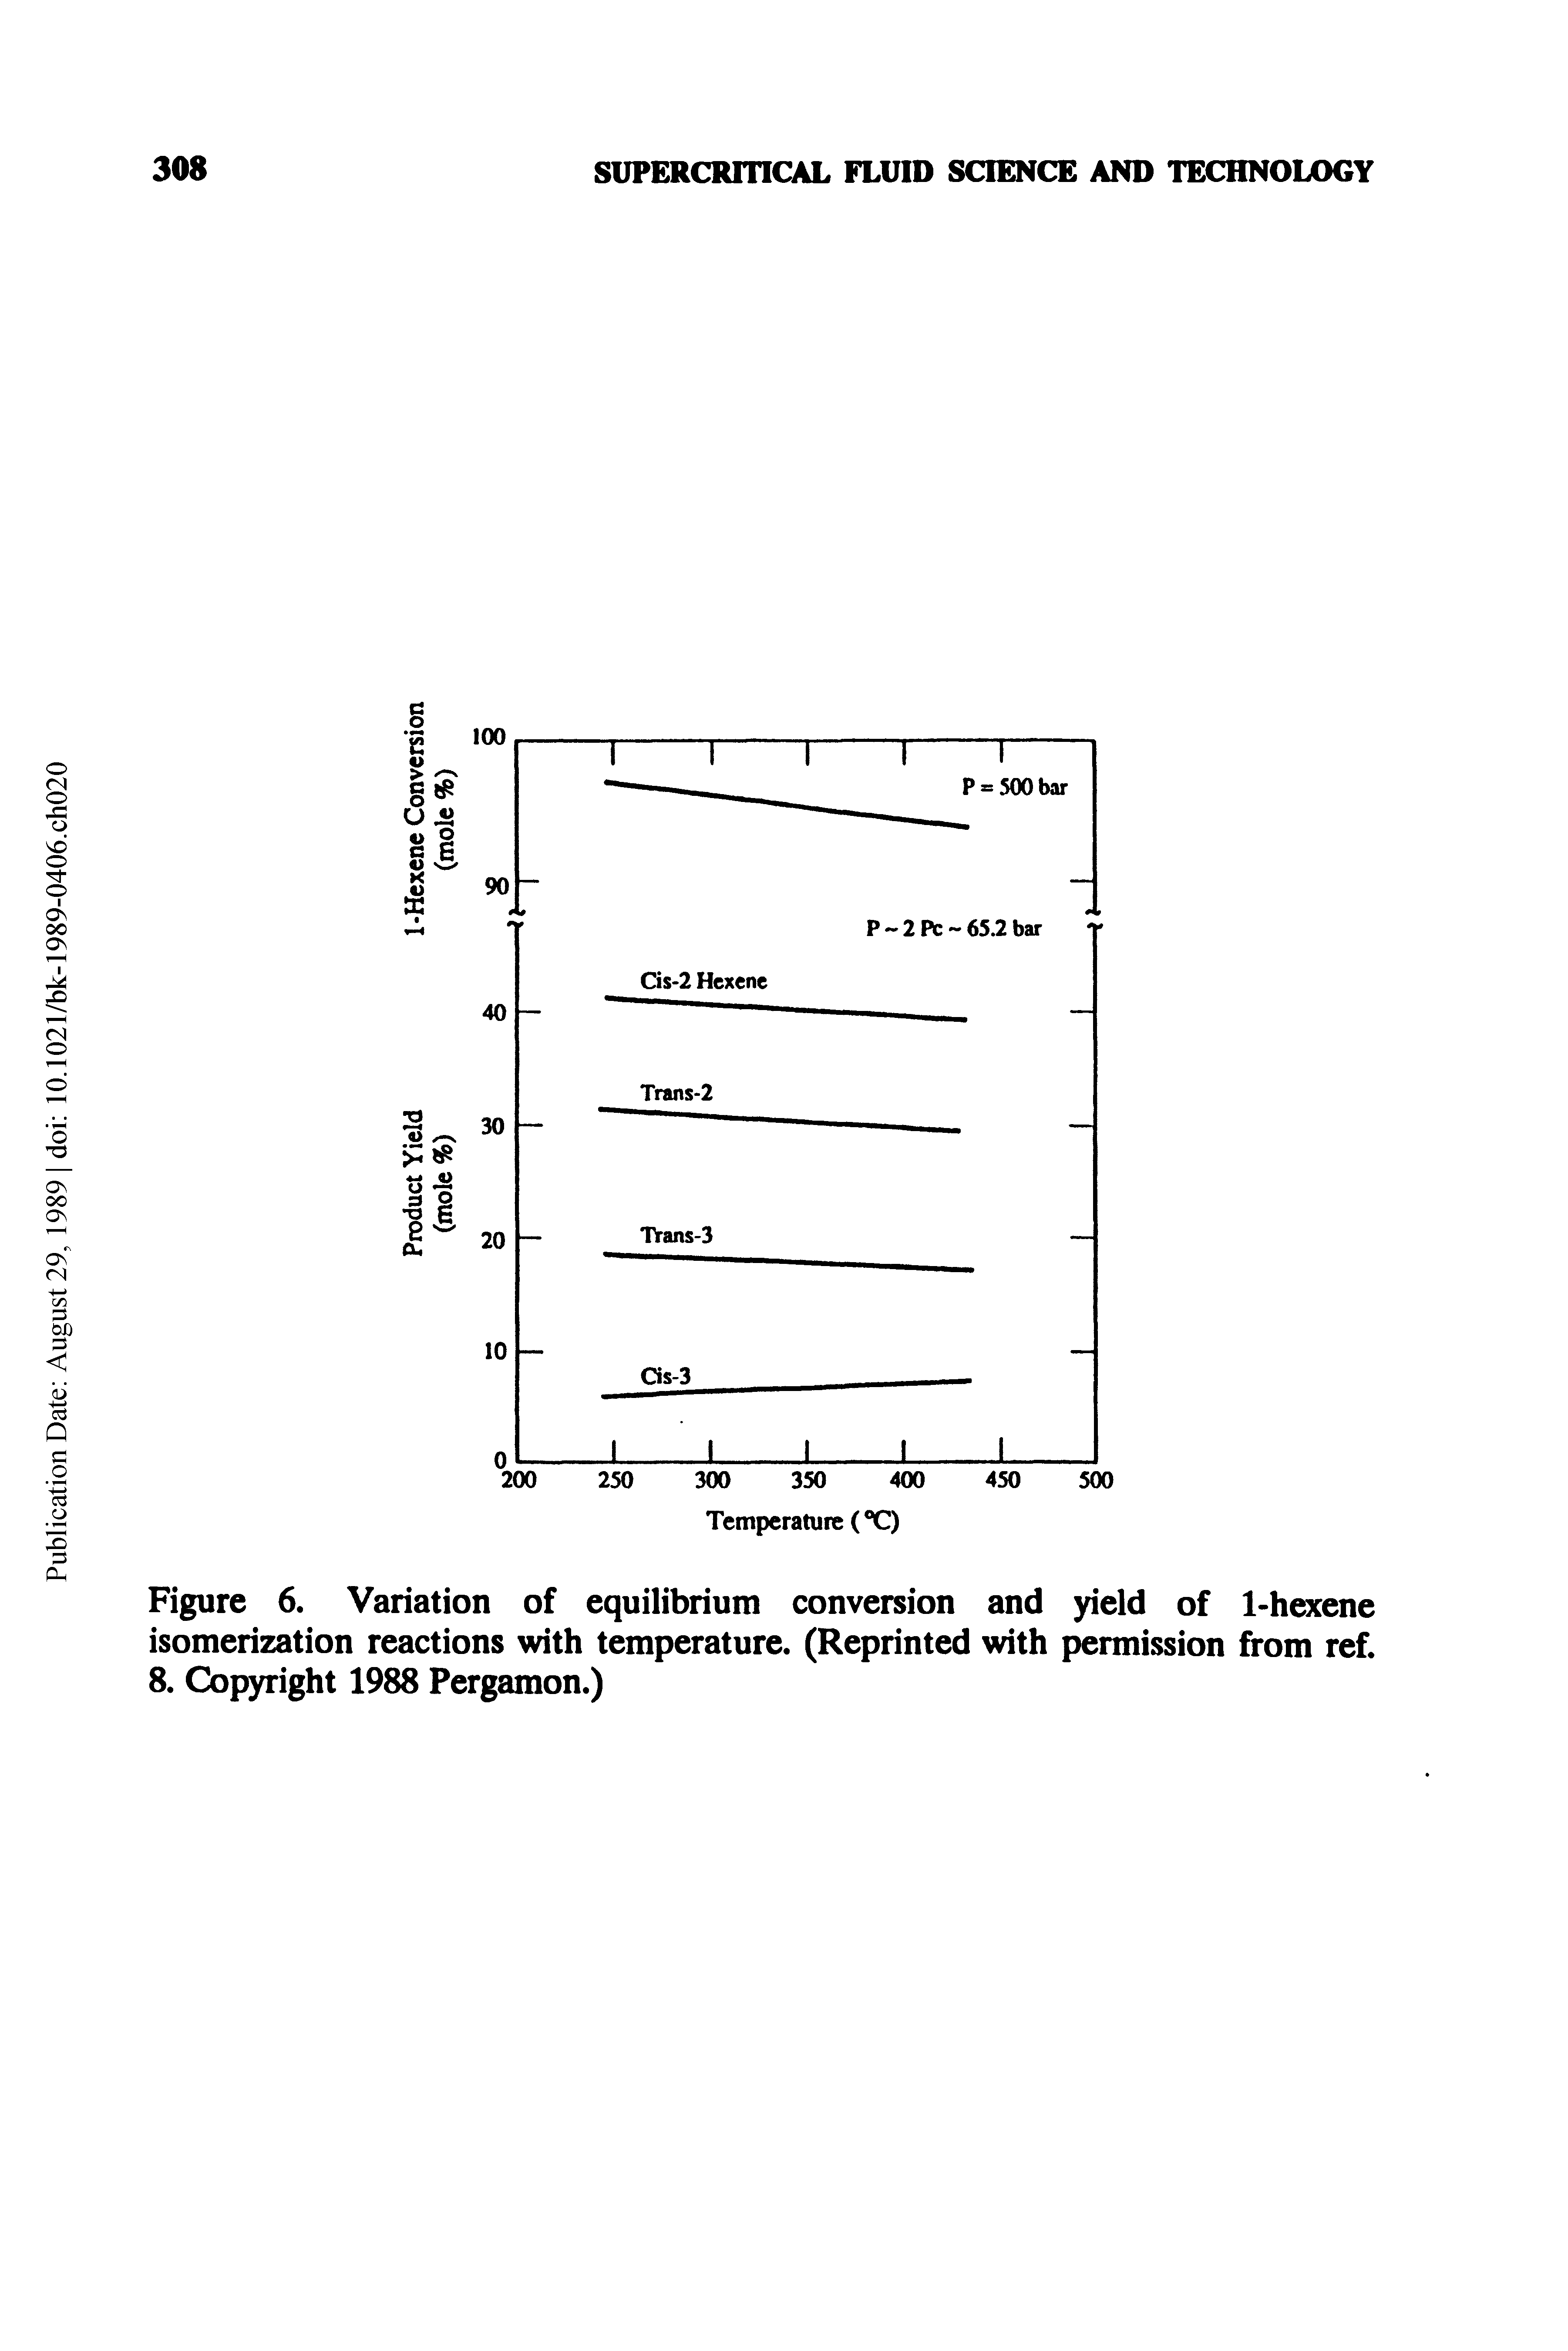 Figure 6. Variation of equilibrium conversion and yield of 1-hexene isomerization reactions with temperature. (Reprinted with permission from ref. 8. Copyright 1988 Pergamon.)...